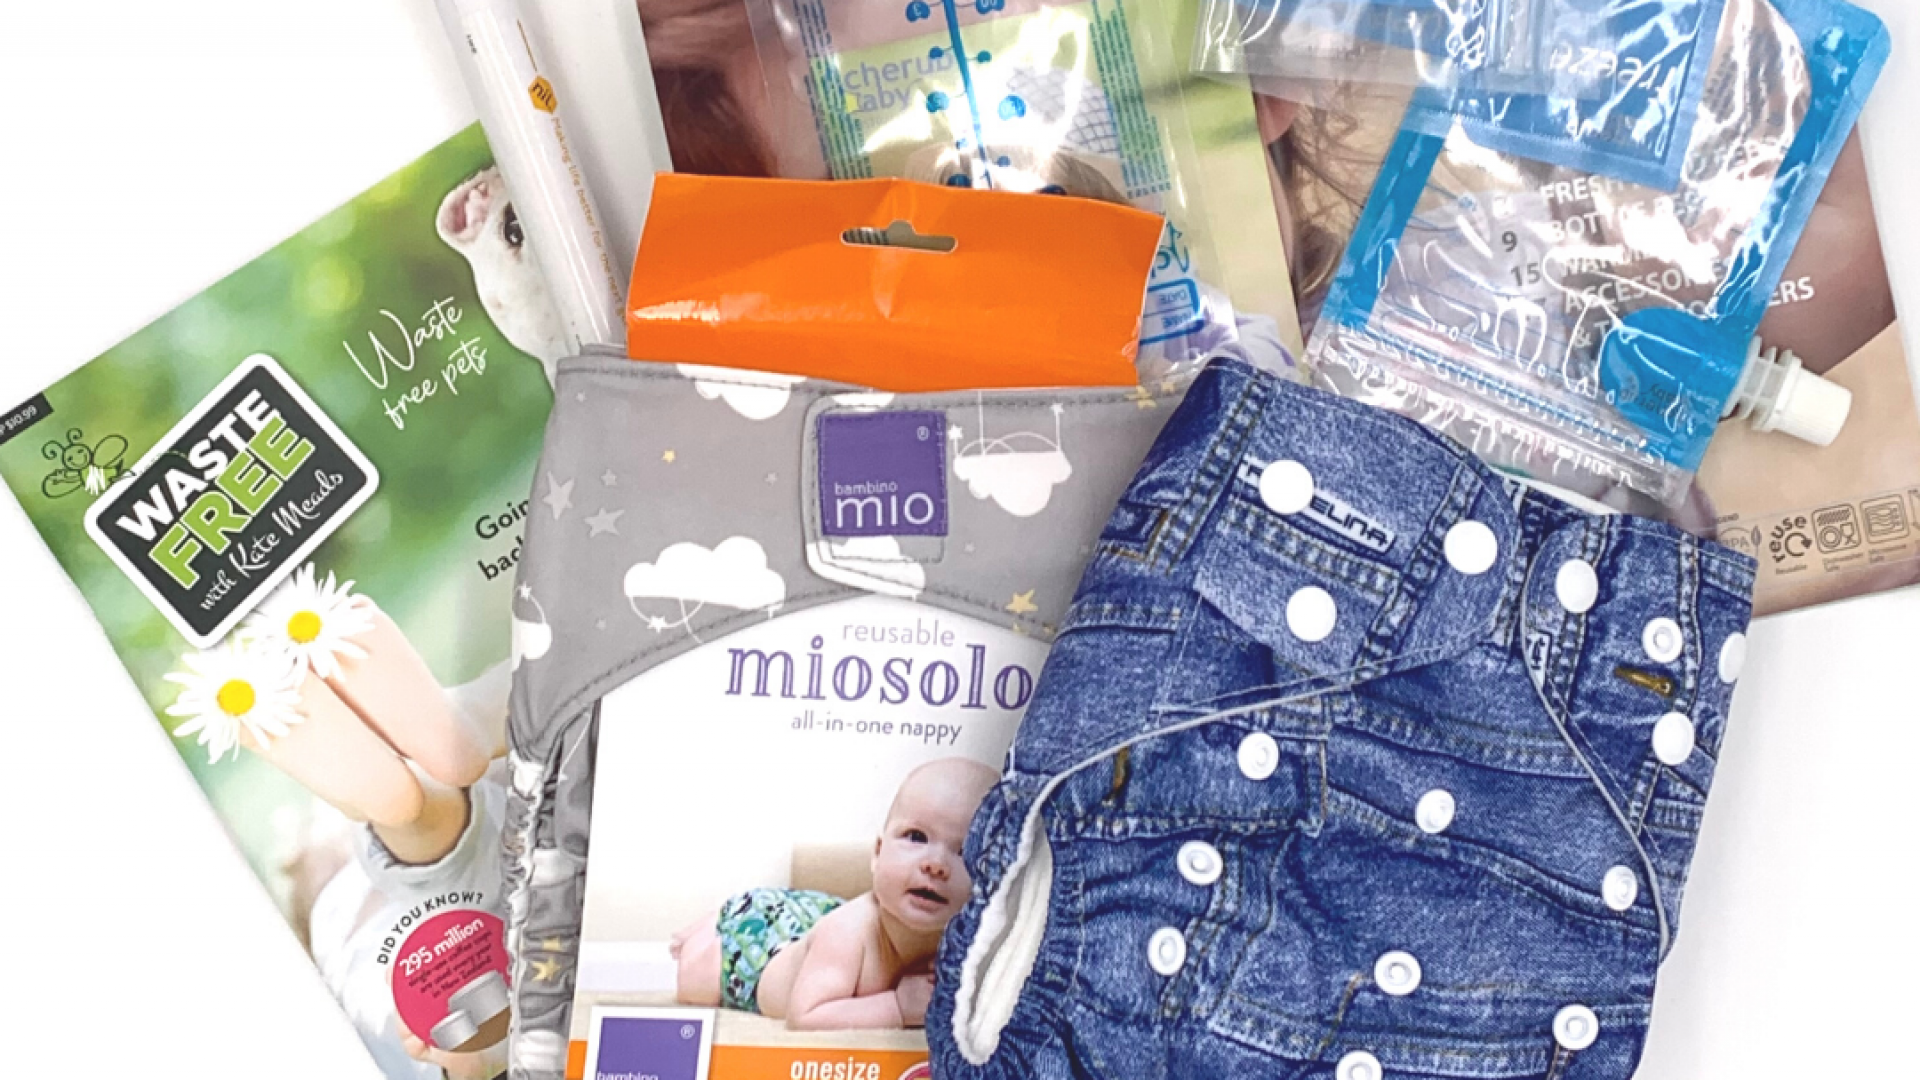 The low waste parenting online course includes a cloth nappy starter pack worth $80.